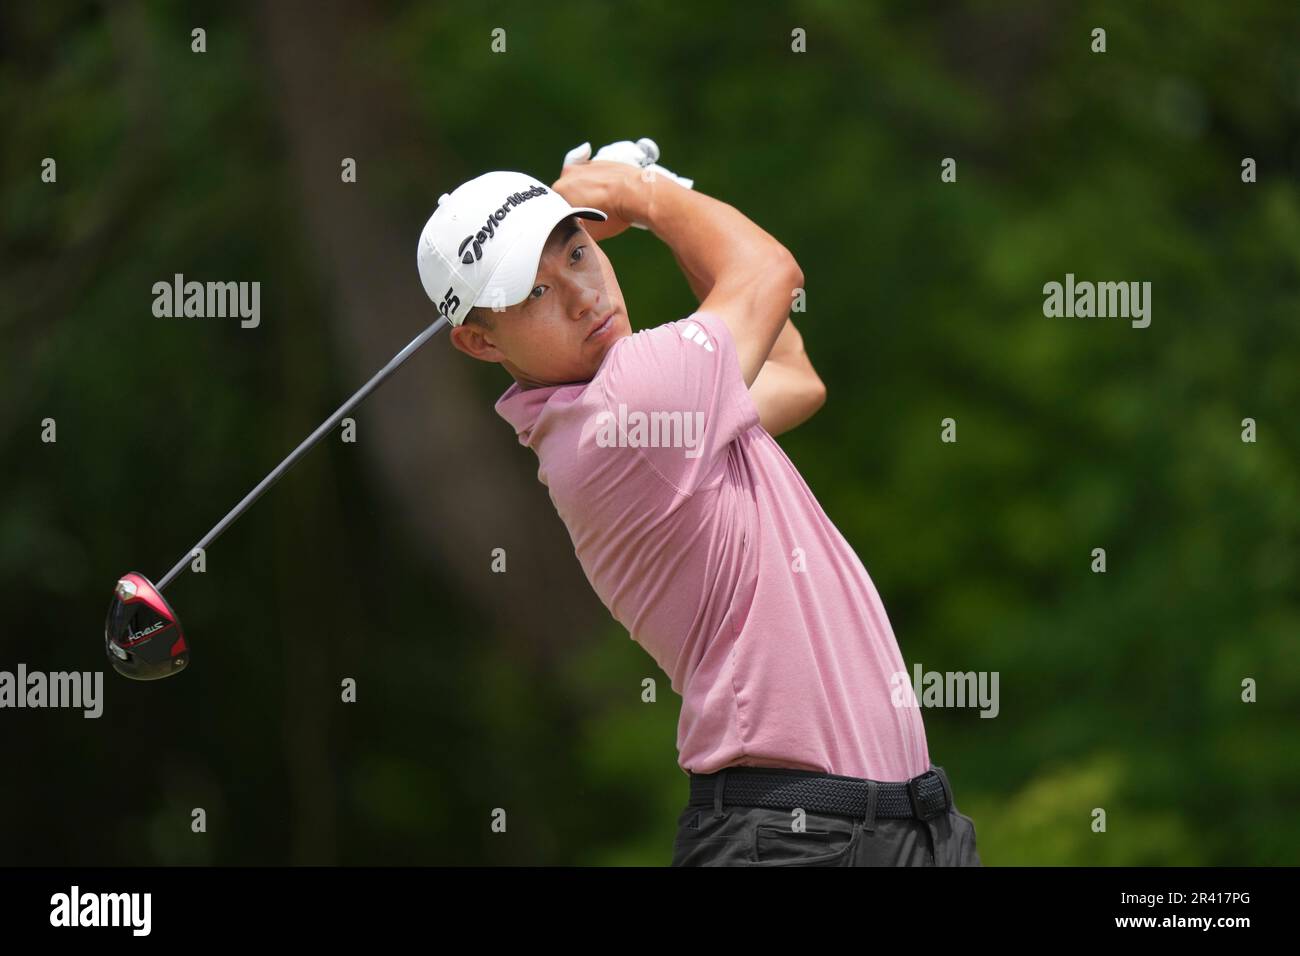 Collin Morikawa hits a tee shot on the sixth hole during the first round of the Charles Schwab Challenge golf tournament at the Colonial Country Club in Fort Worth, Texas, Thursday, May 25, 2023. (AP Photo/LM Otero) Stock Photo